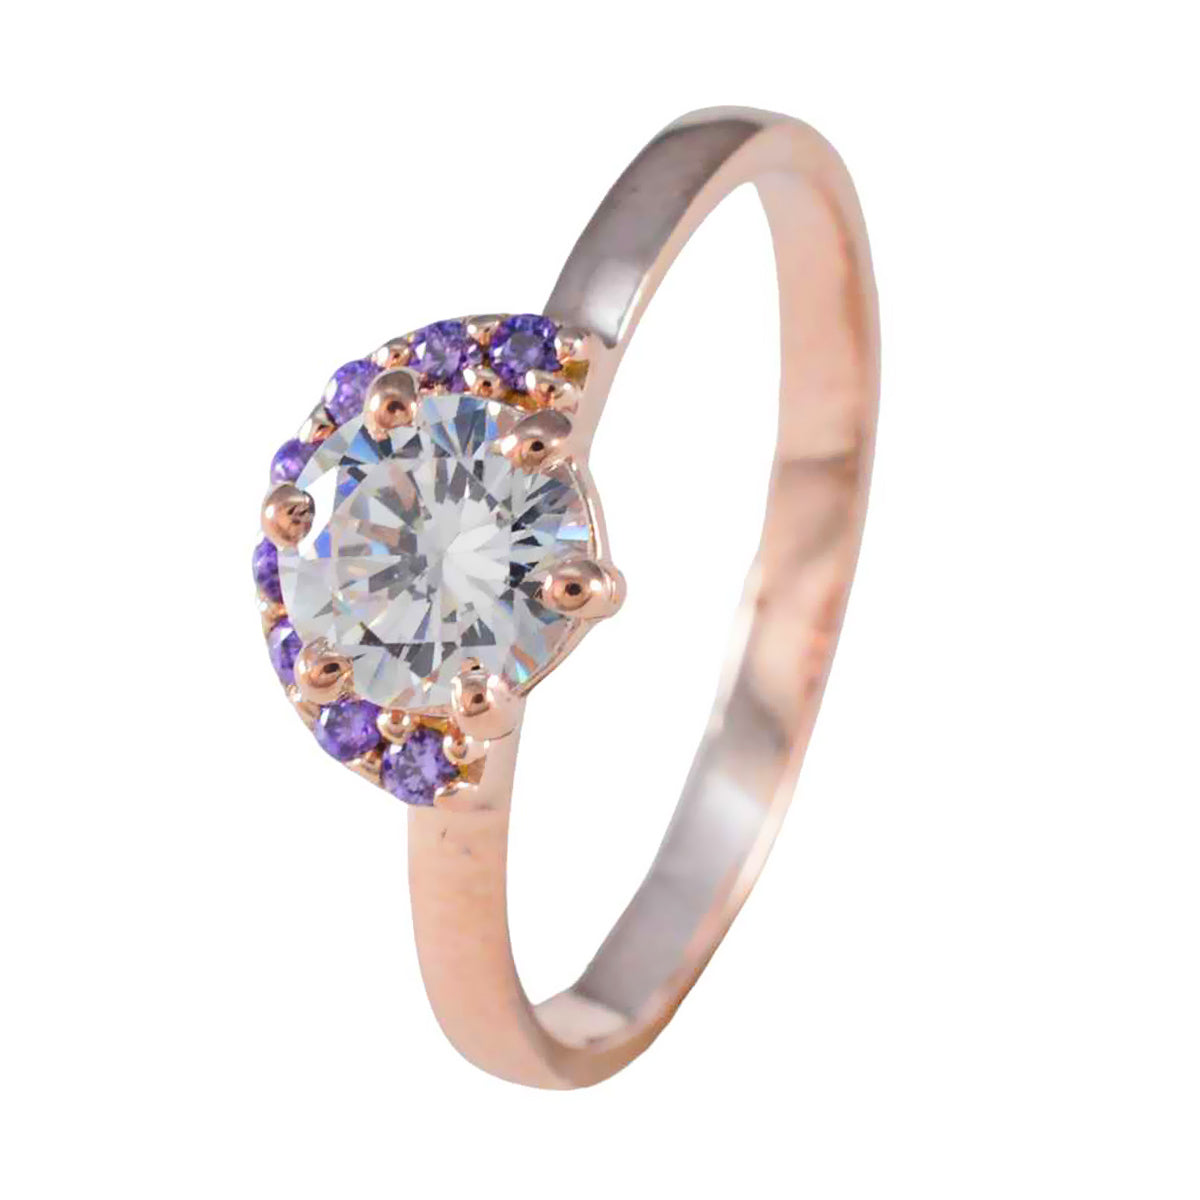 Riyo Jaipur Silver Ring With Rose Gold Plating Amethyst Stone Round Shape Prong Setting Antique Jewelry Graduation Ring